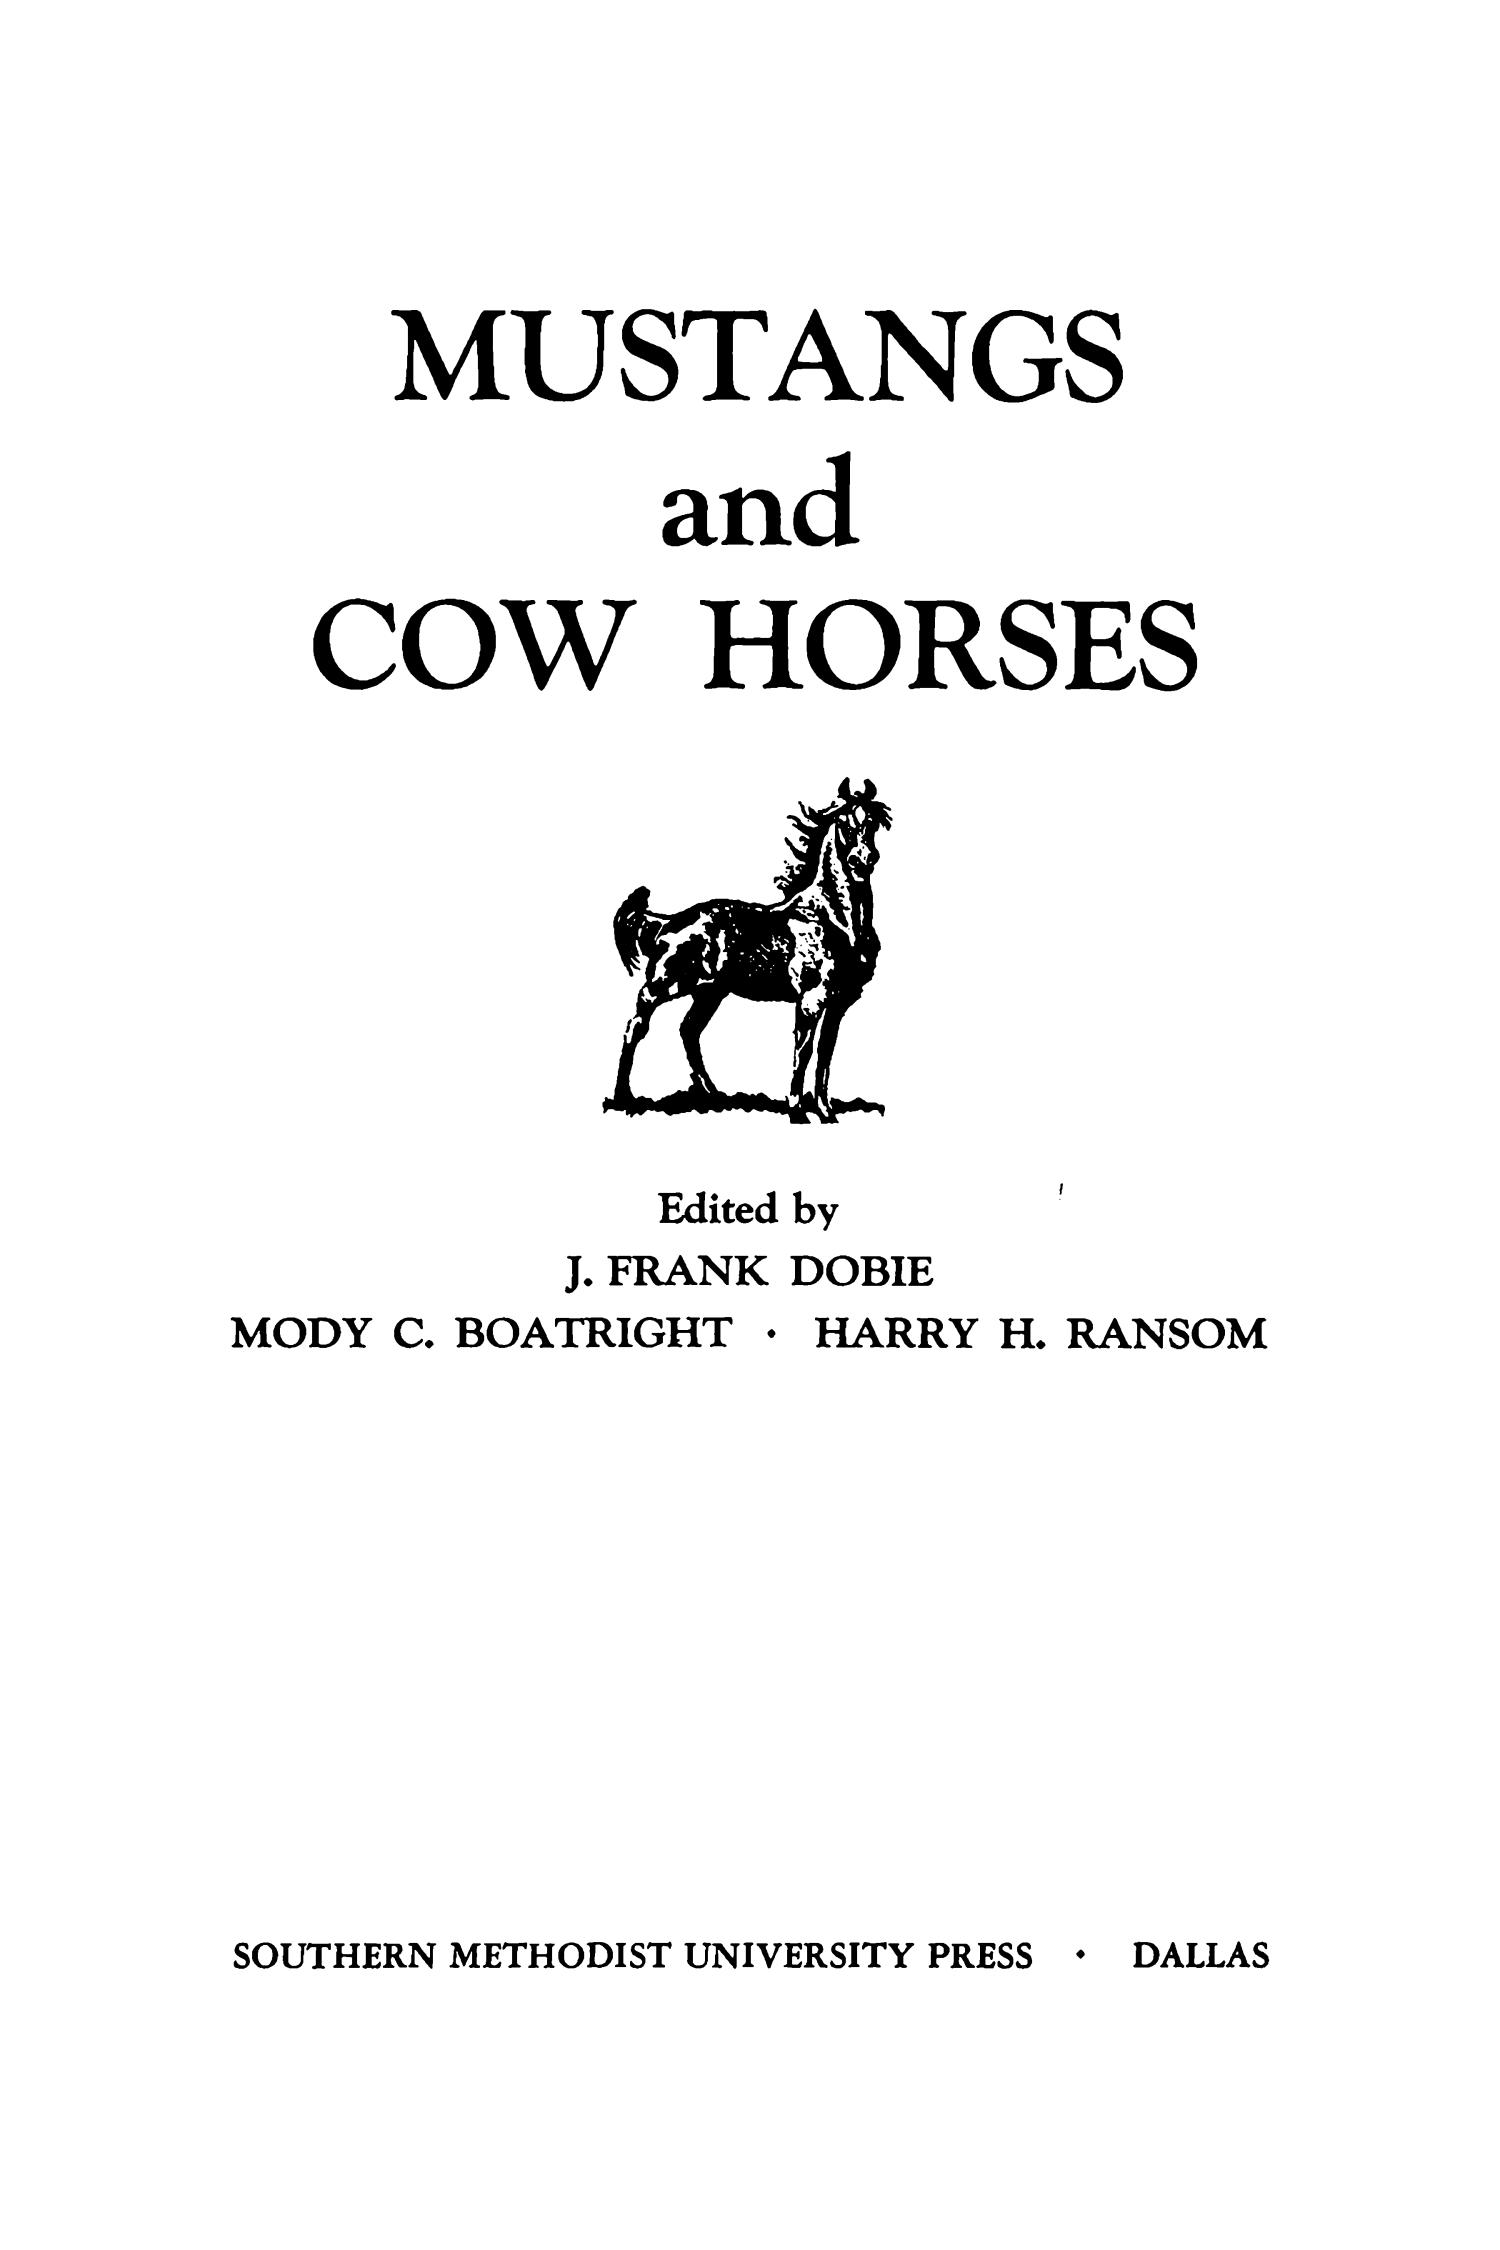 Mustangs and Cow Horses
                                                
                                                    III
                                                